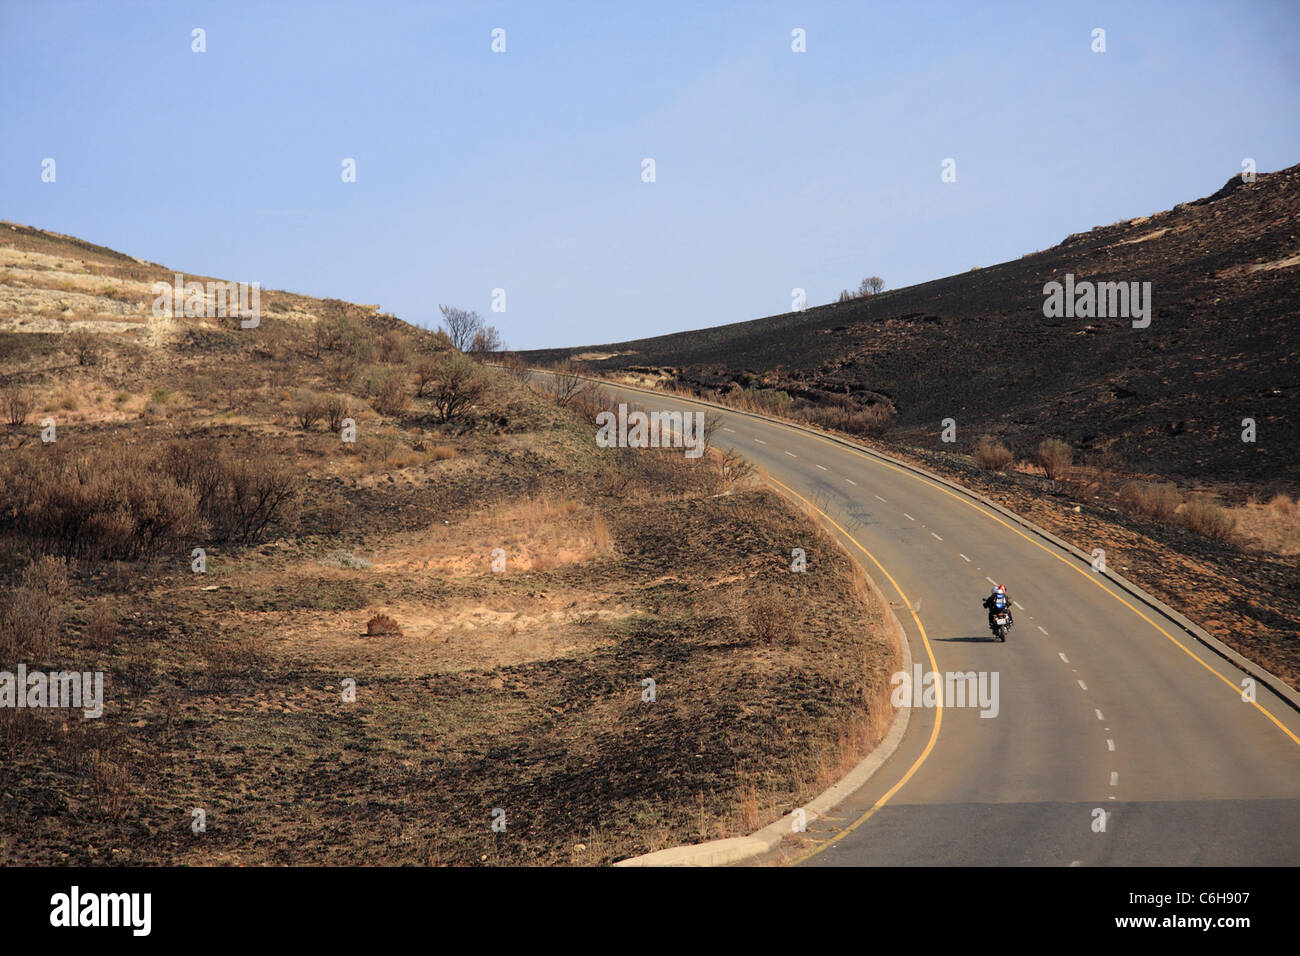 Tar road in remote landscape with motorcycle Stock Photo